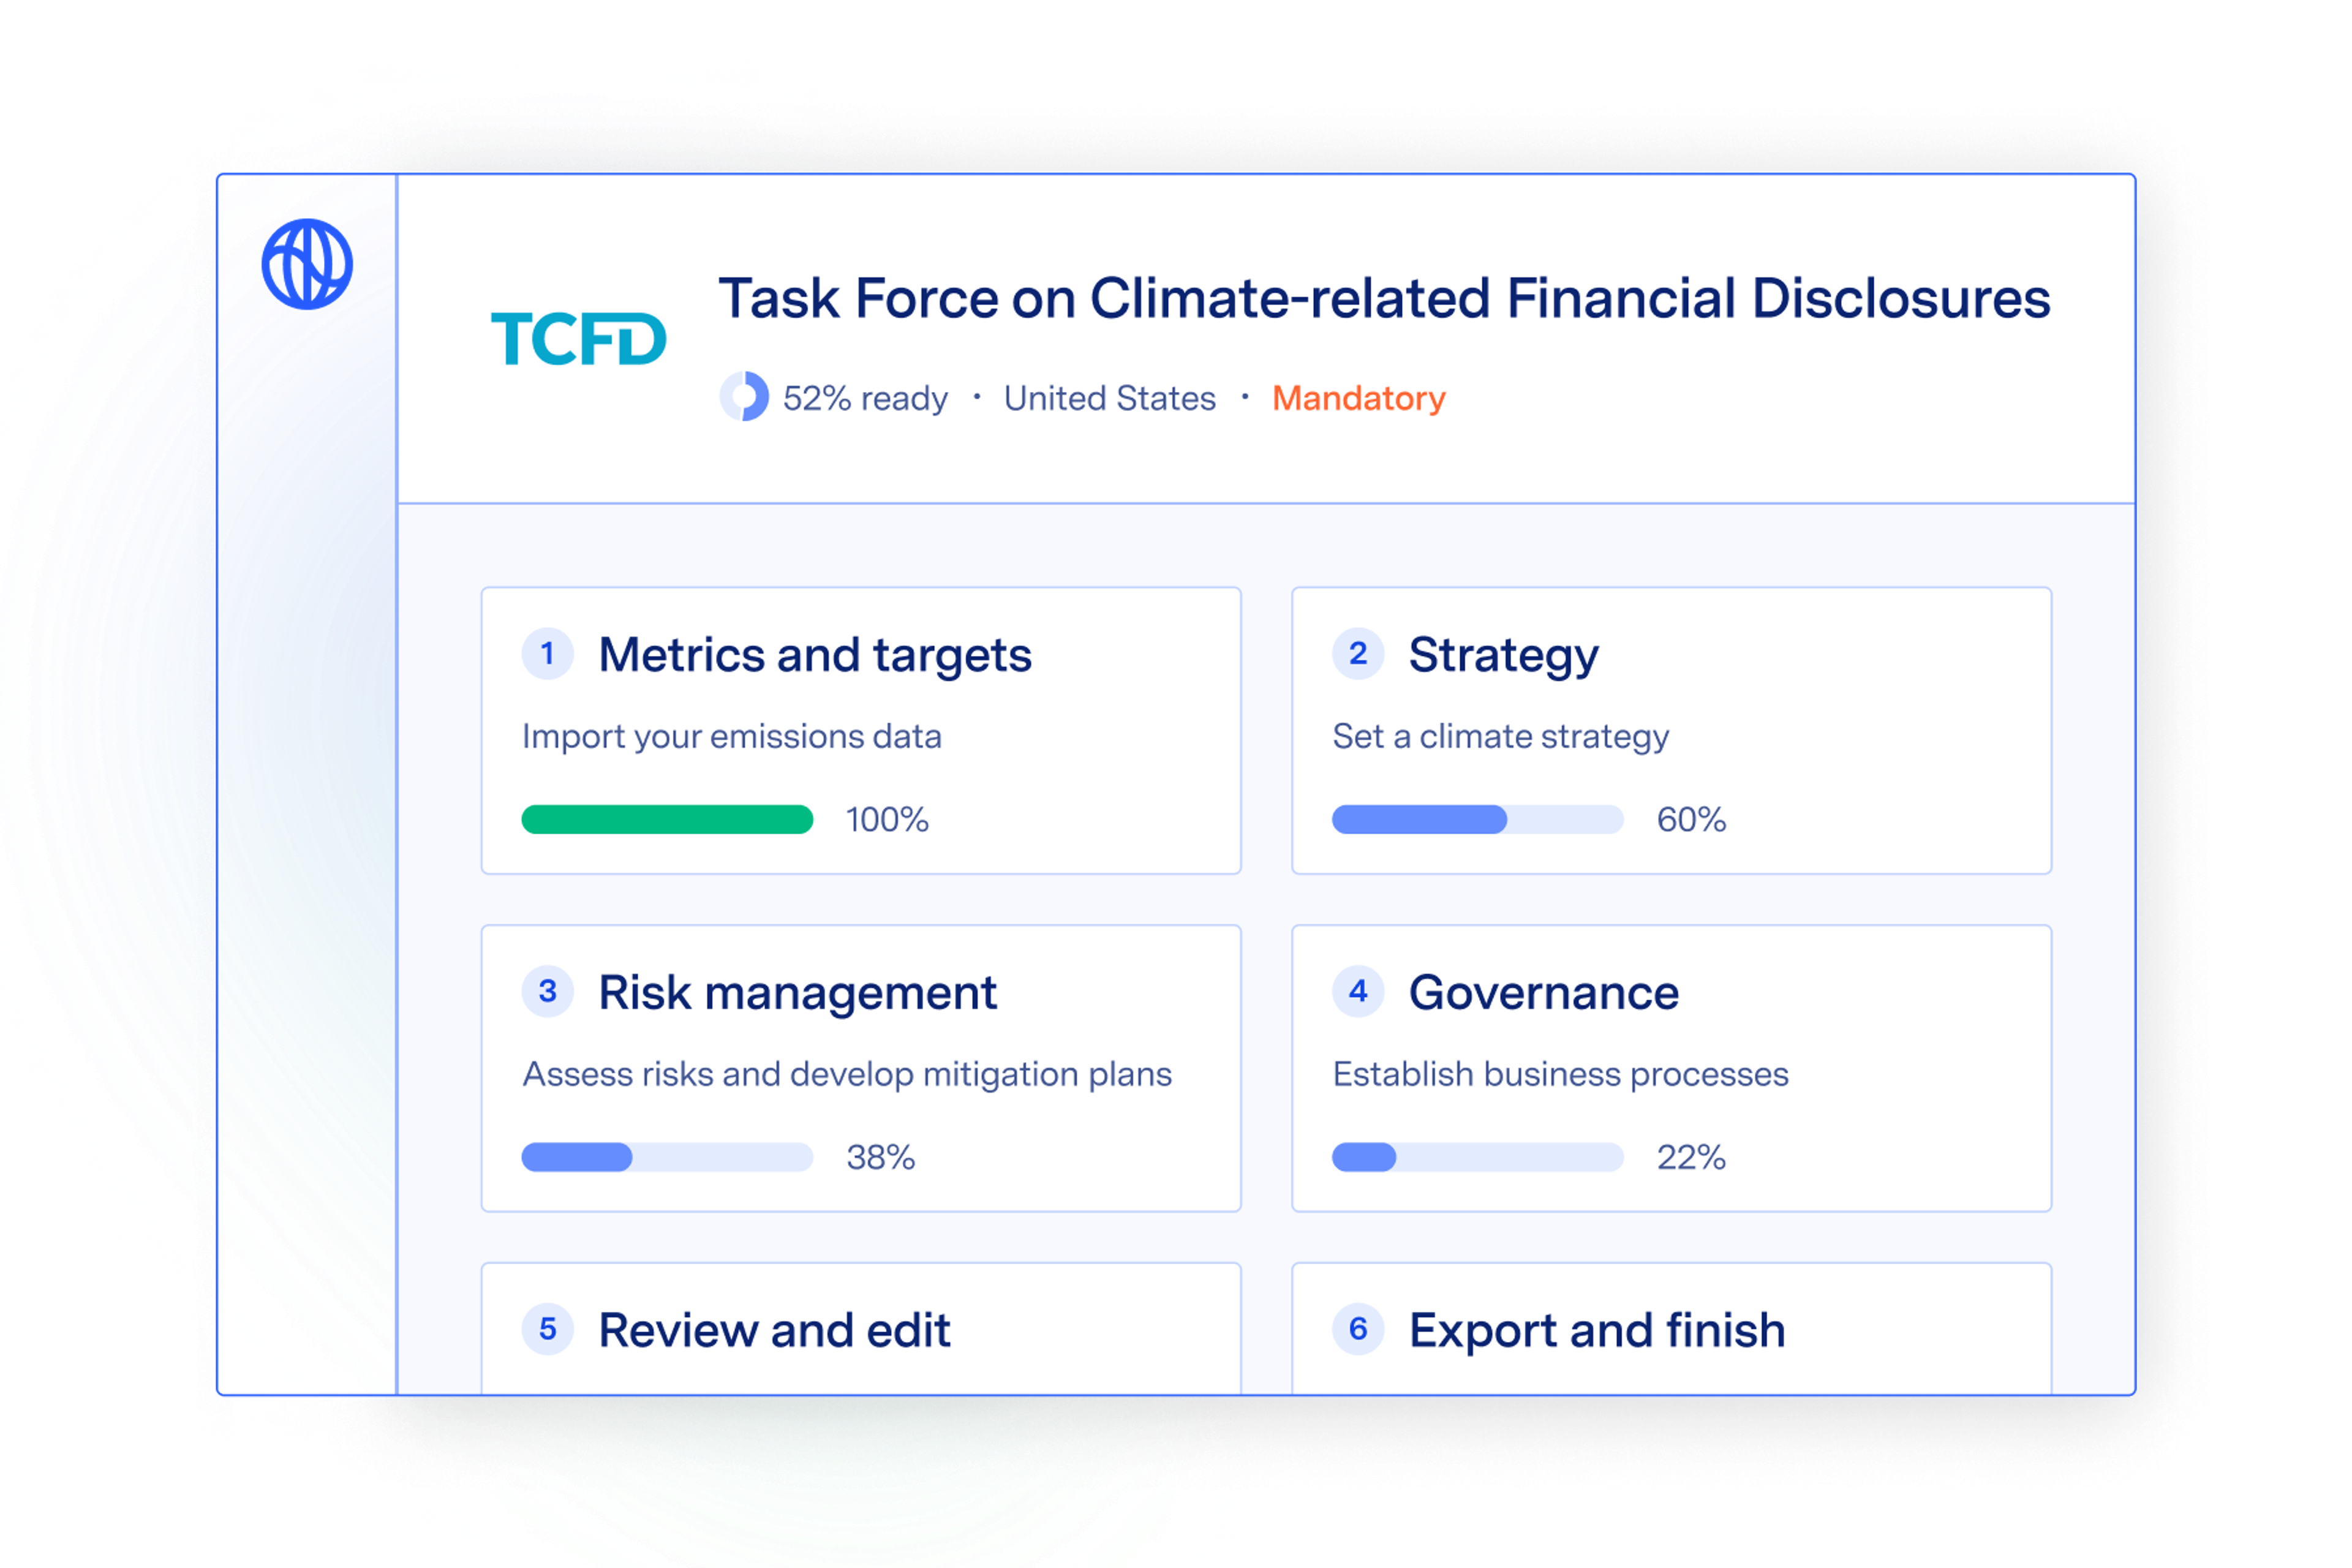 Taskforce on climate-related financial disclosures